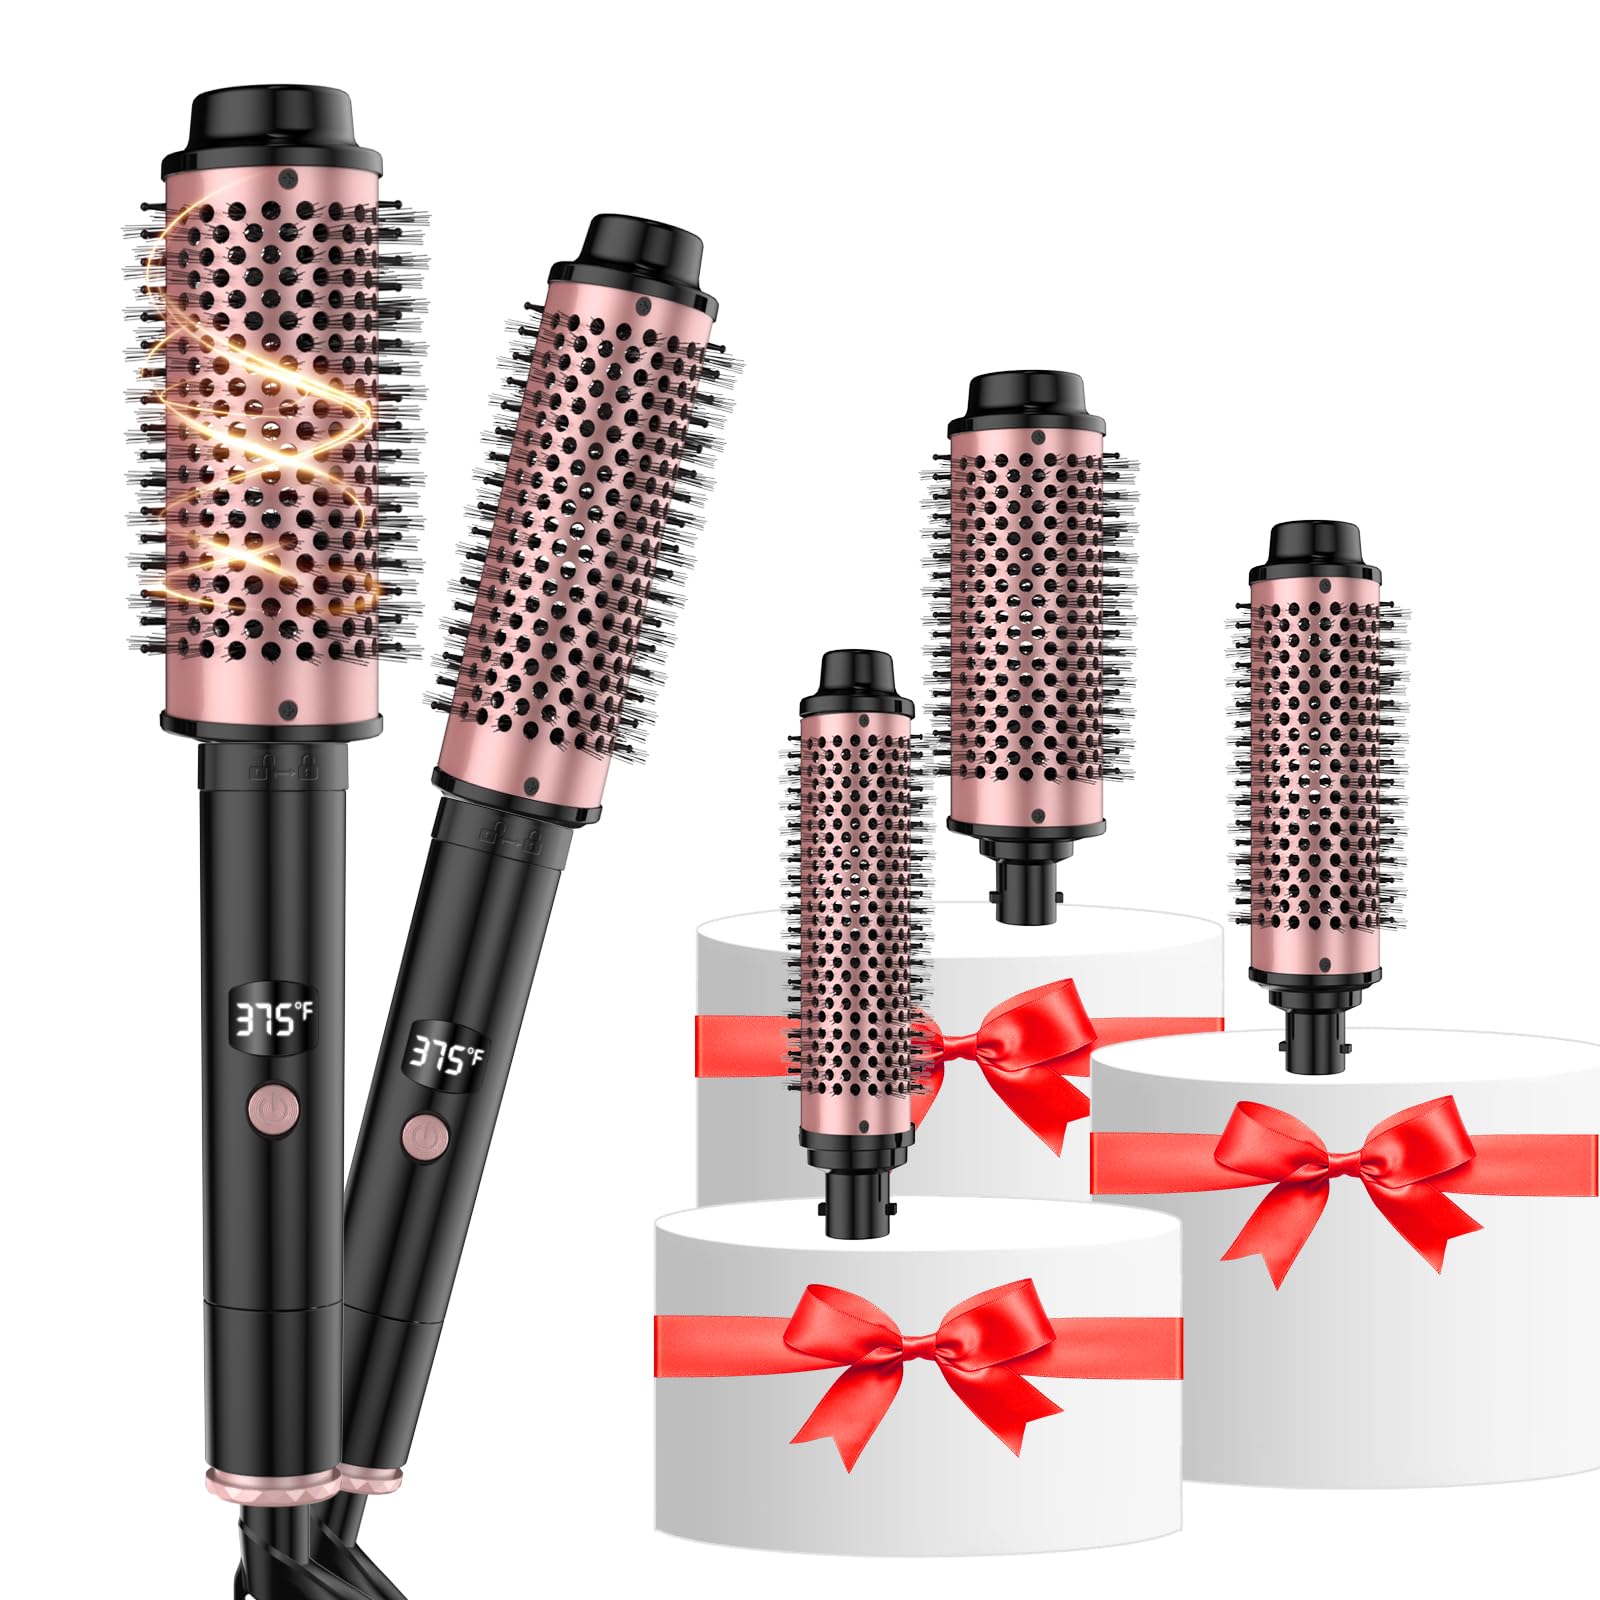 Detachable Power Double PTC 110-210C High Temperature 1.25/1.5/1.75 Inch Detachable Barrel 3 in 1 Thermal Brush